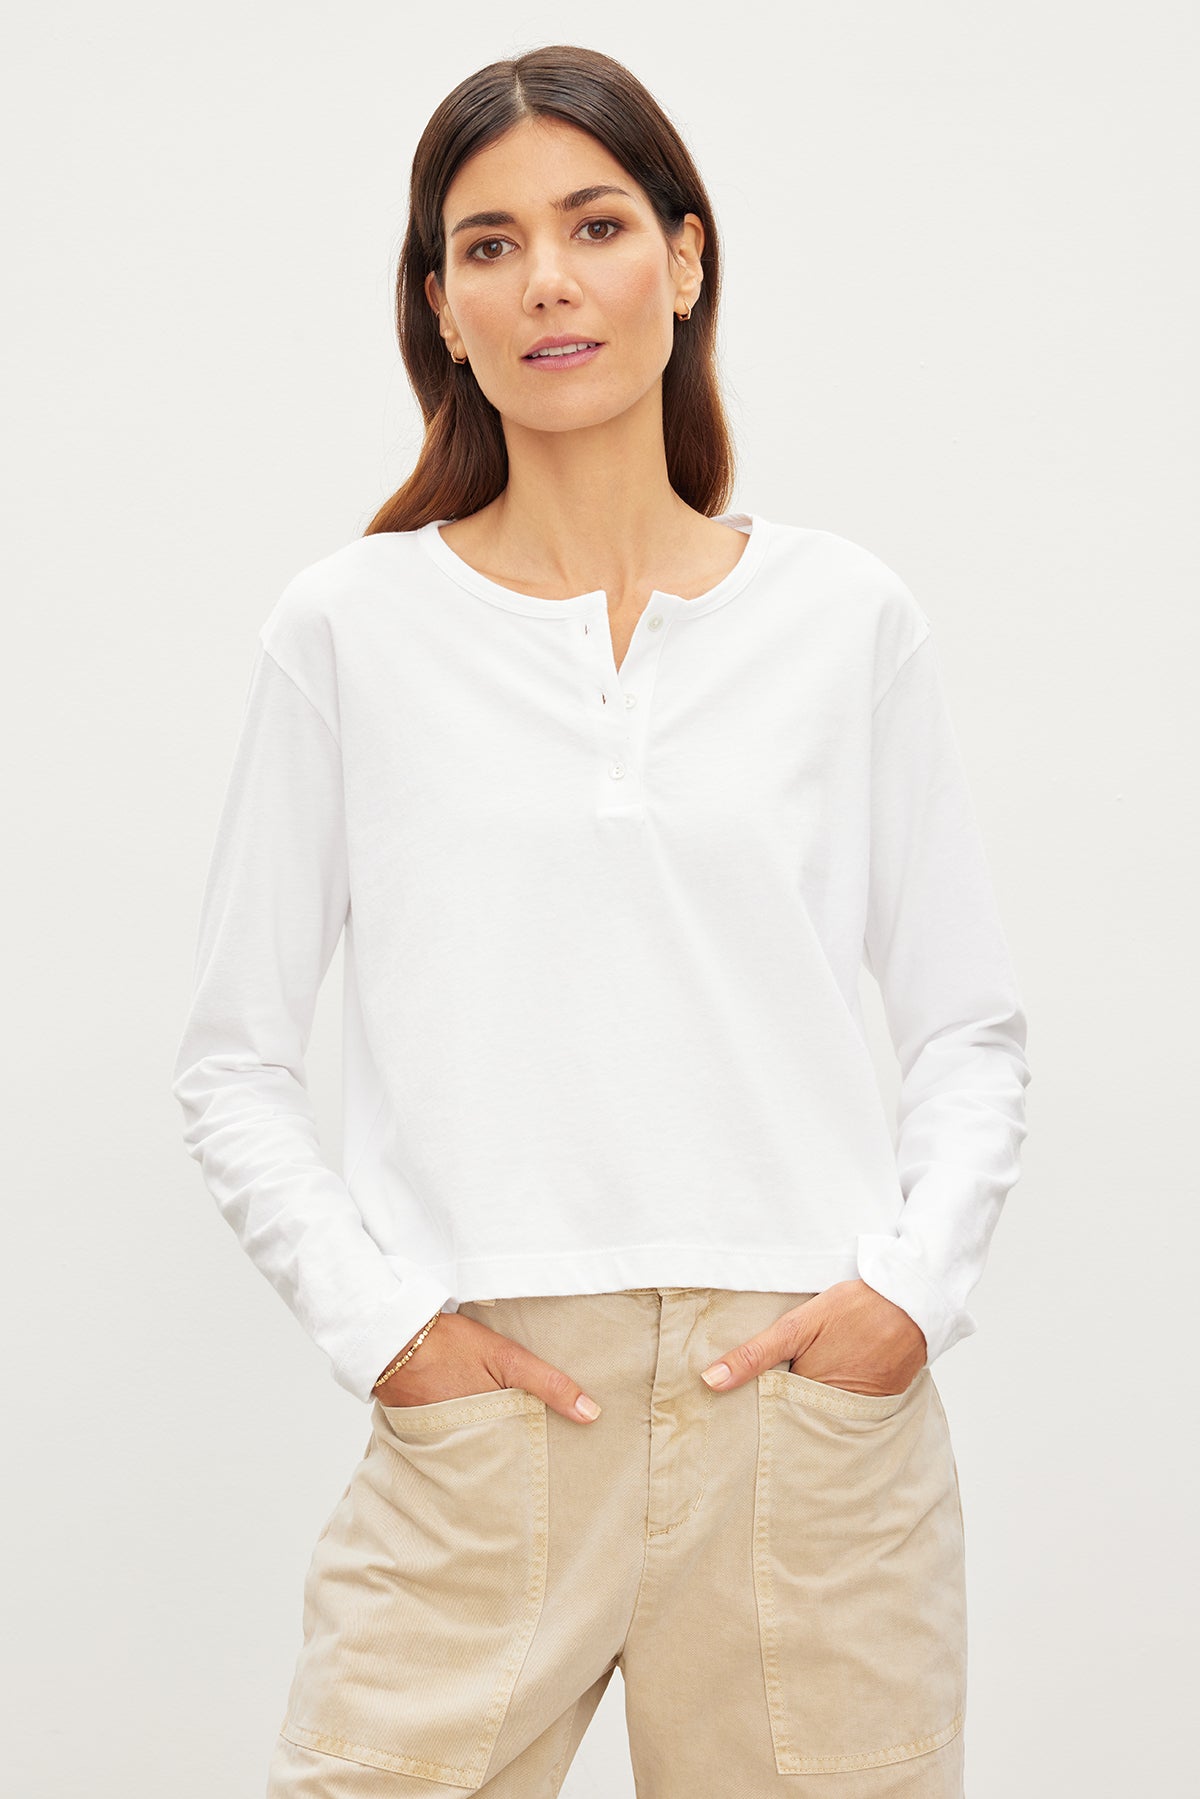   The model is wearing a white Deliah Cropped Henley tee and khaki pants. 